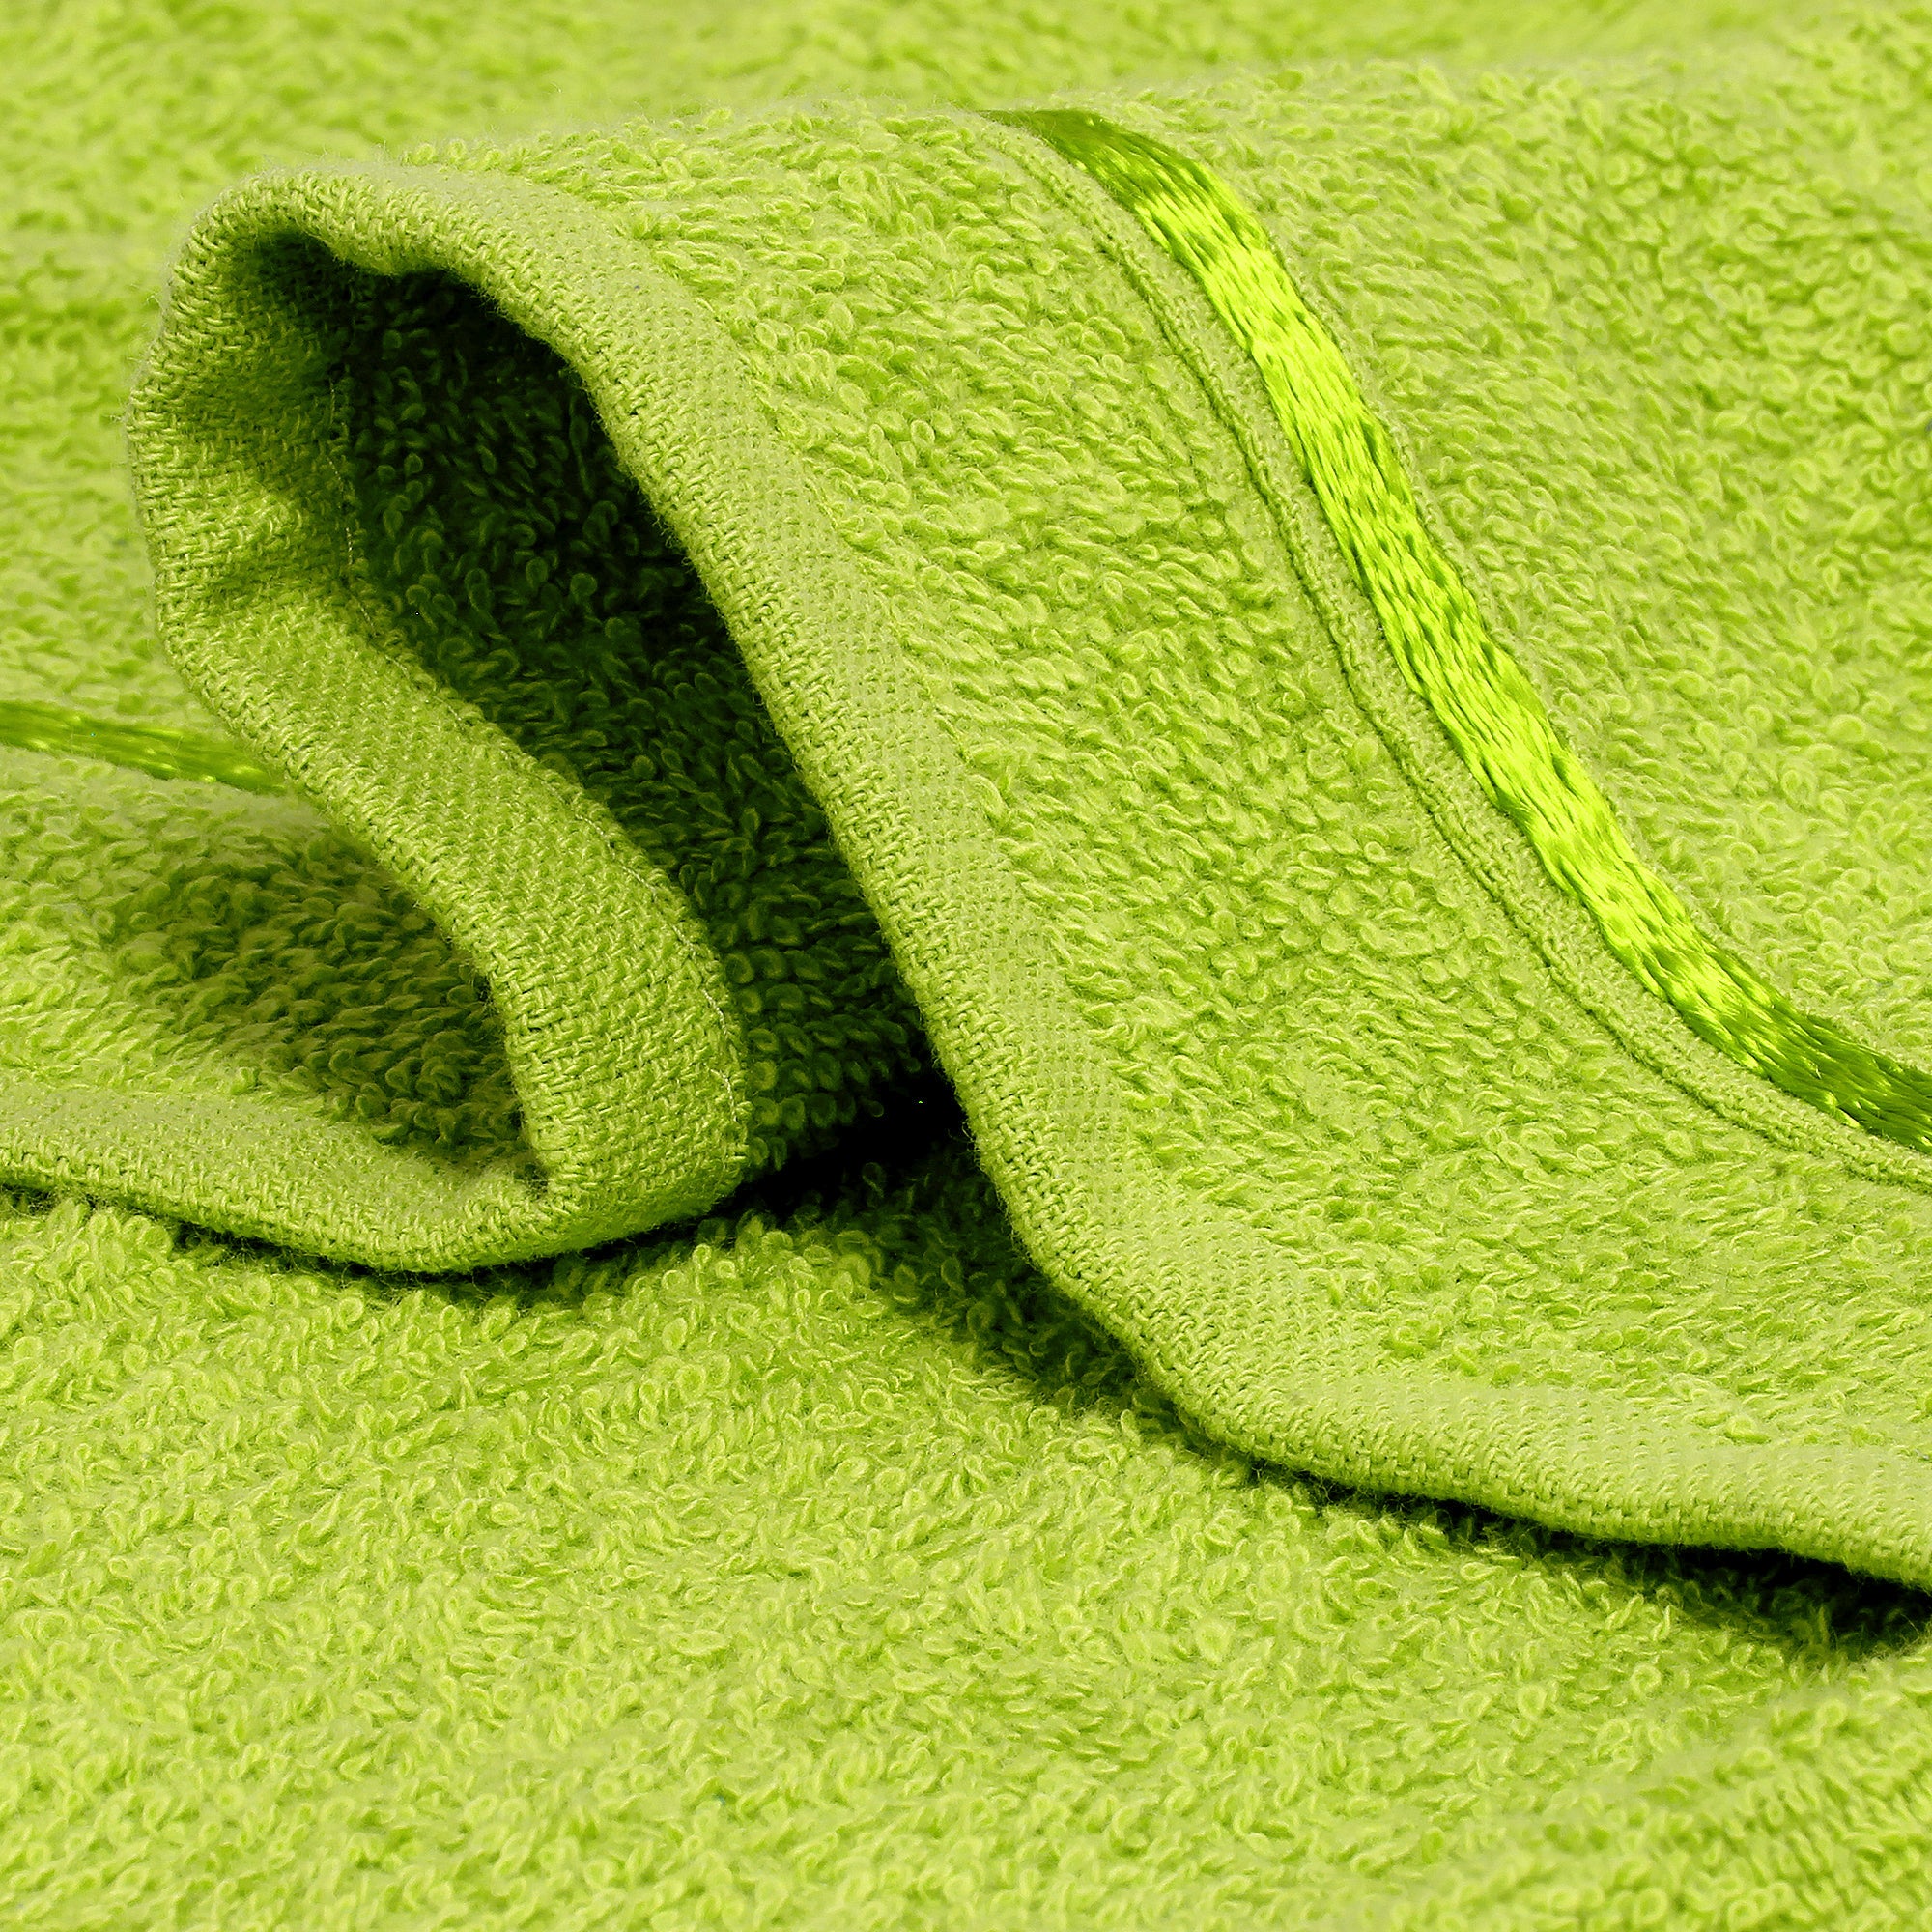 Story@Home 20 Units 100% Cotton Face Towels - Green